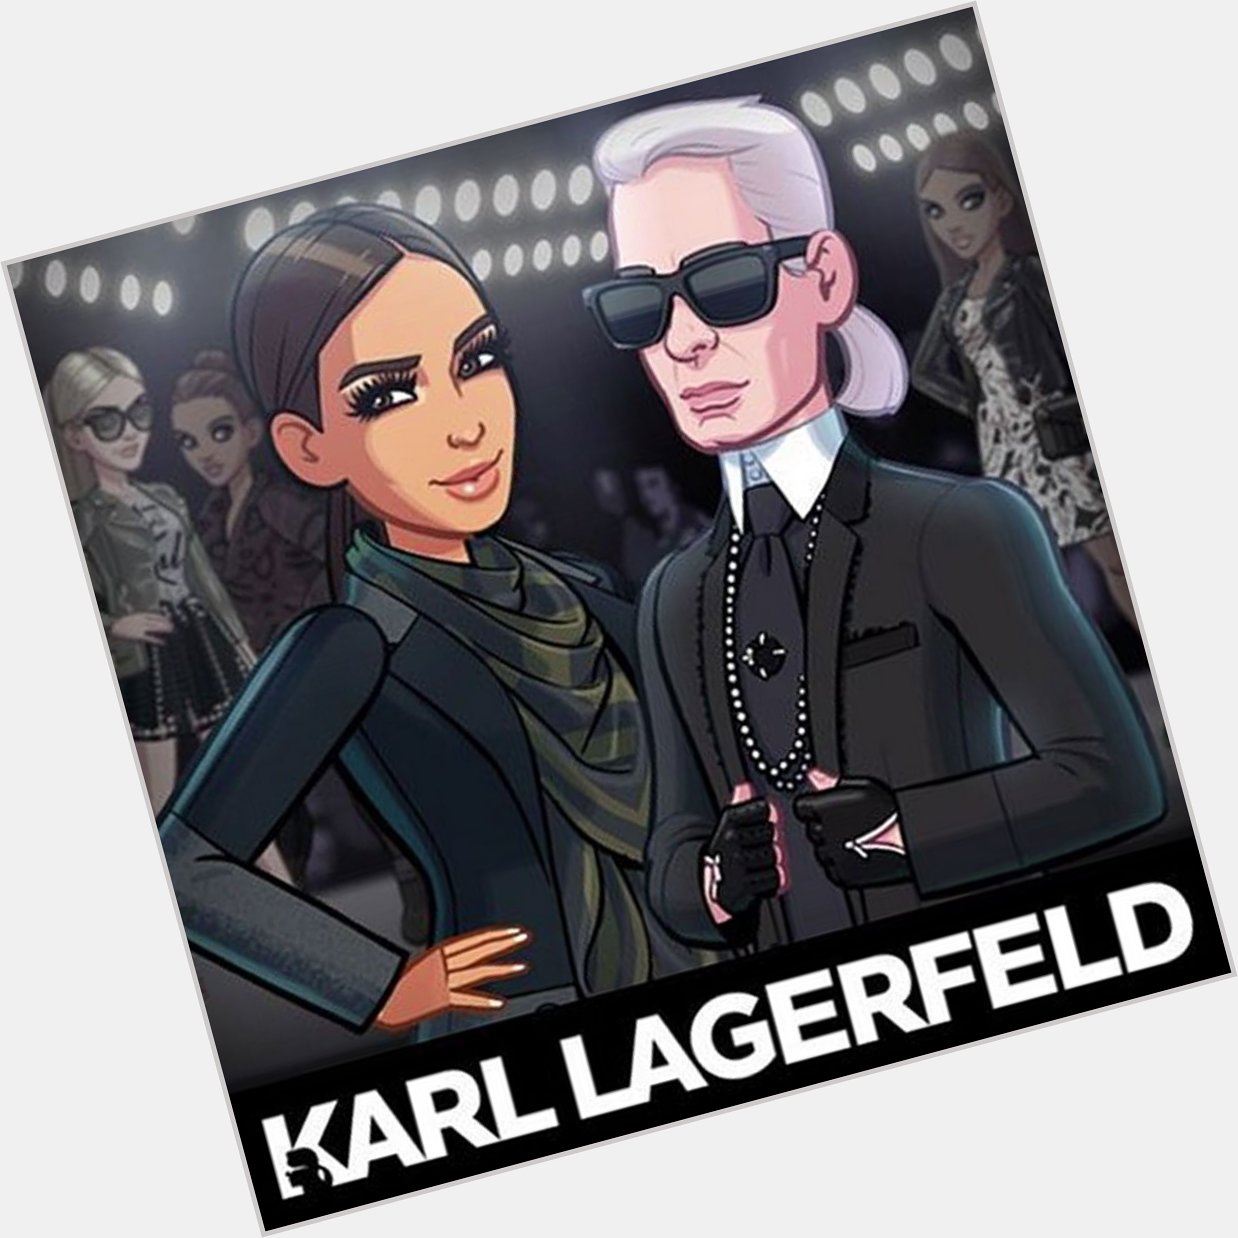 Karl Lagerfeld on what he REALLY thinks about Kim Kardashian:  